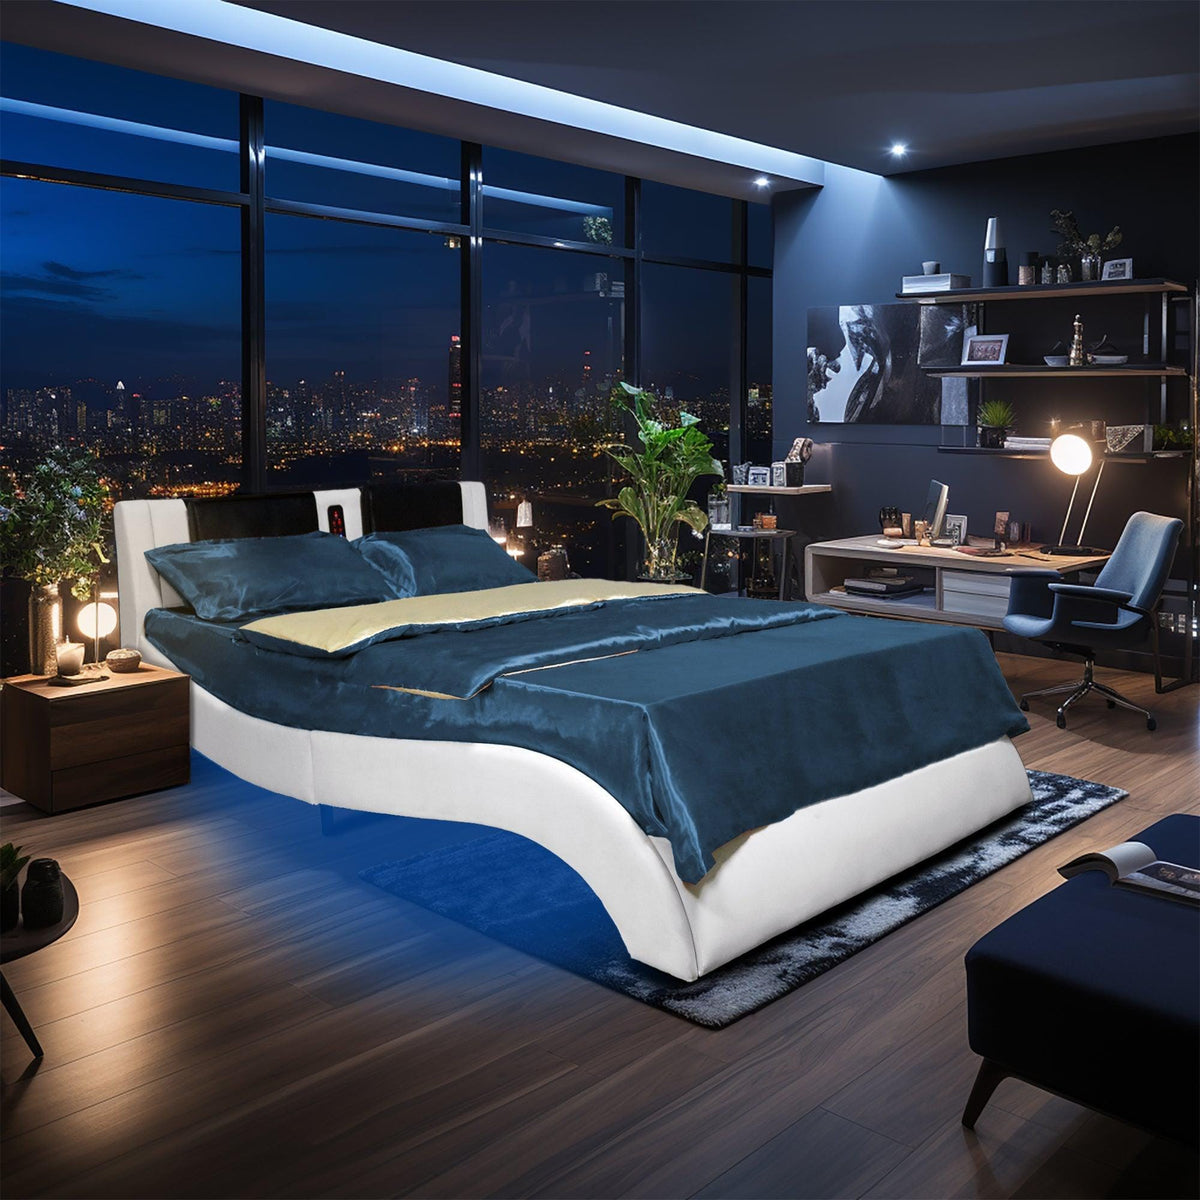 mattress xperts Miami Modern Queen Bed with LED, Speaking USB Miami Modern Queen Bed with LEDs, Speaker USB Mattress-Xperts-Florida